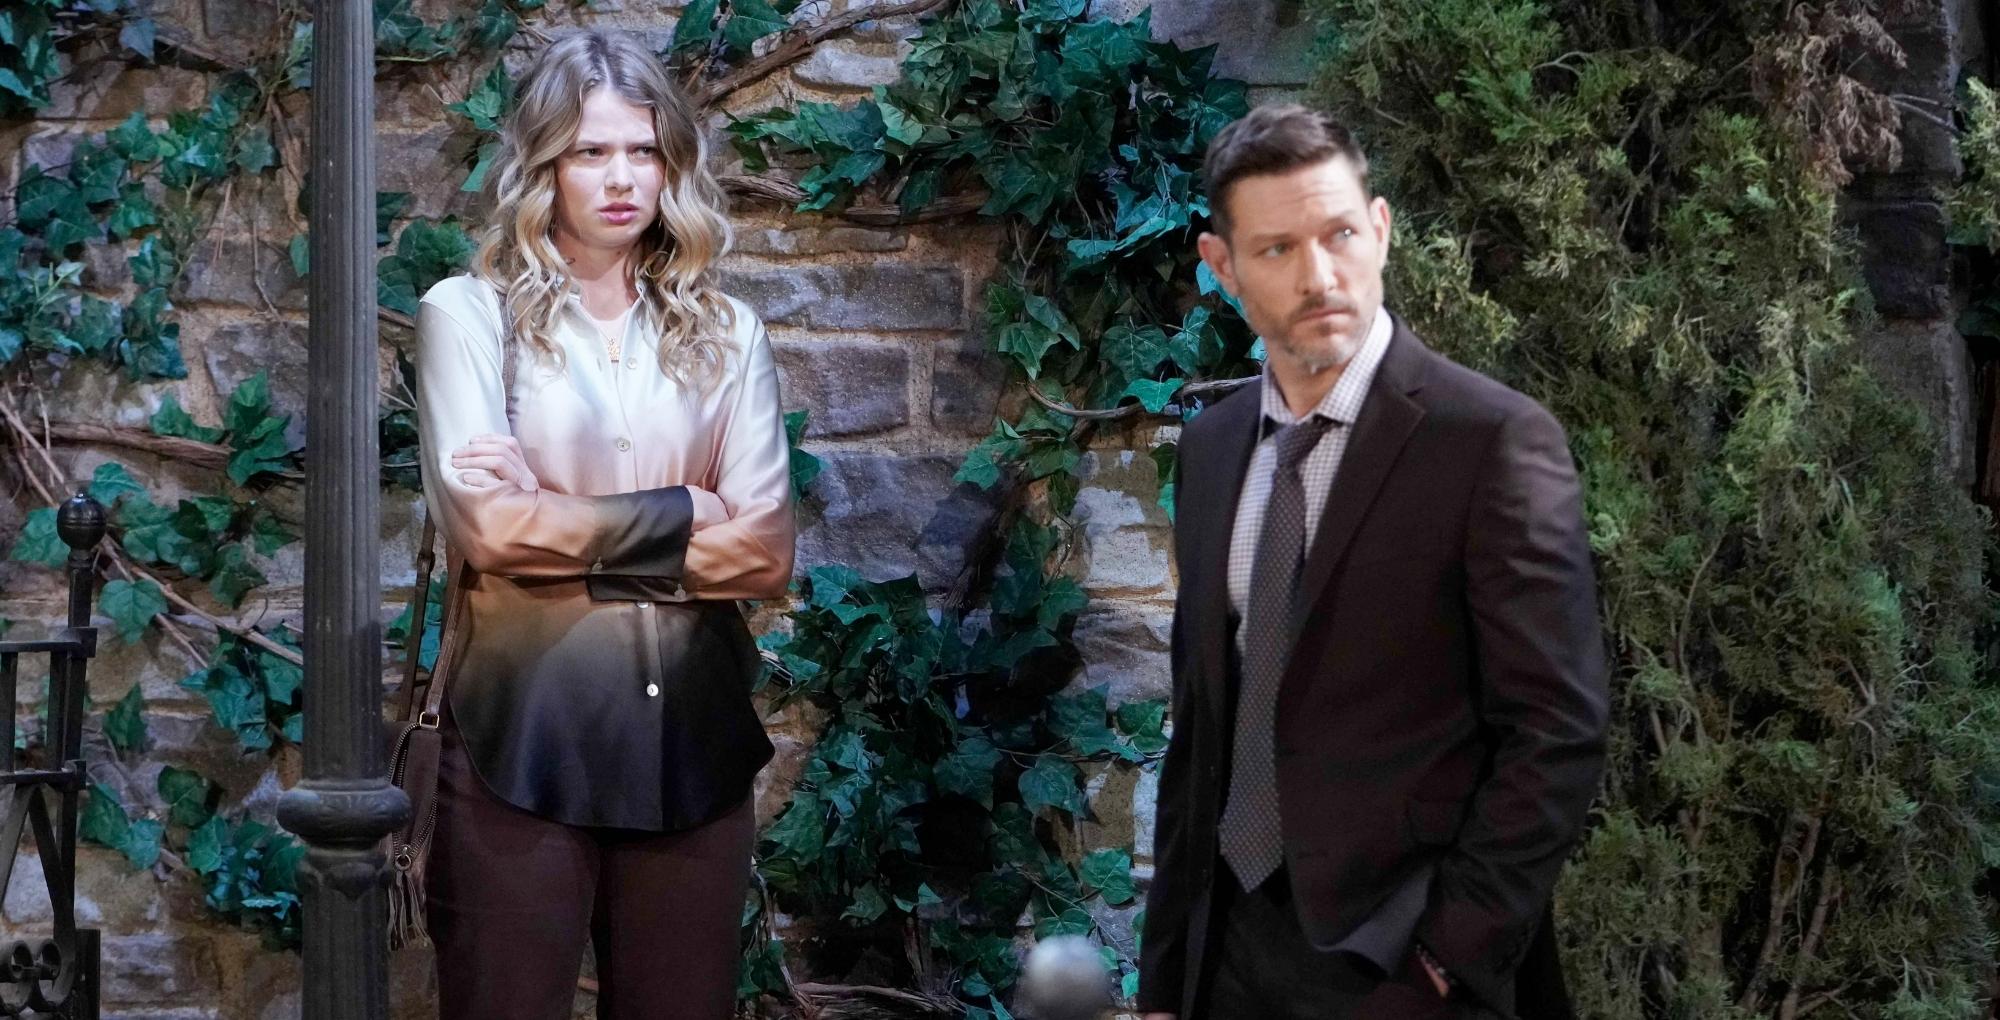 summer newman and daniel romalotti argue in the young and the restless recap for may 8, 2023.